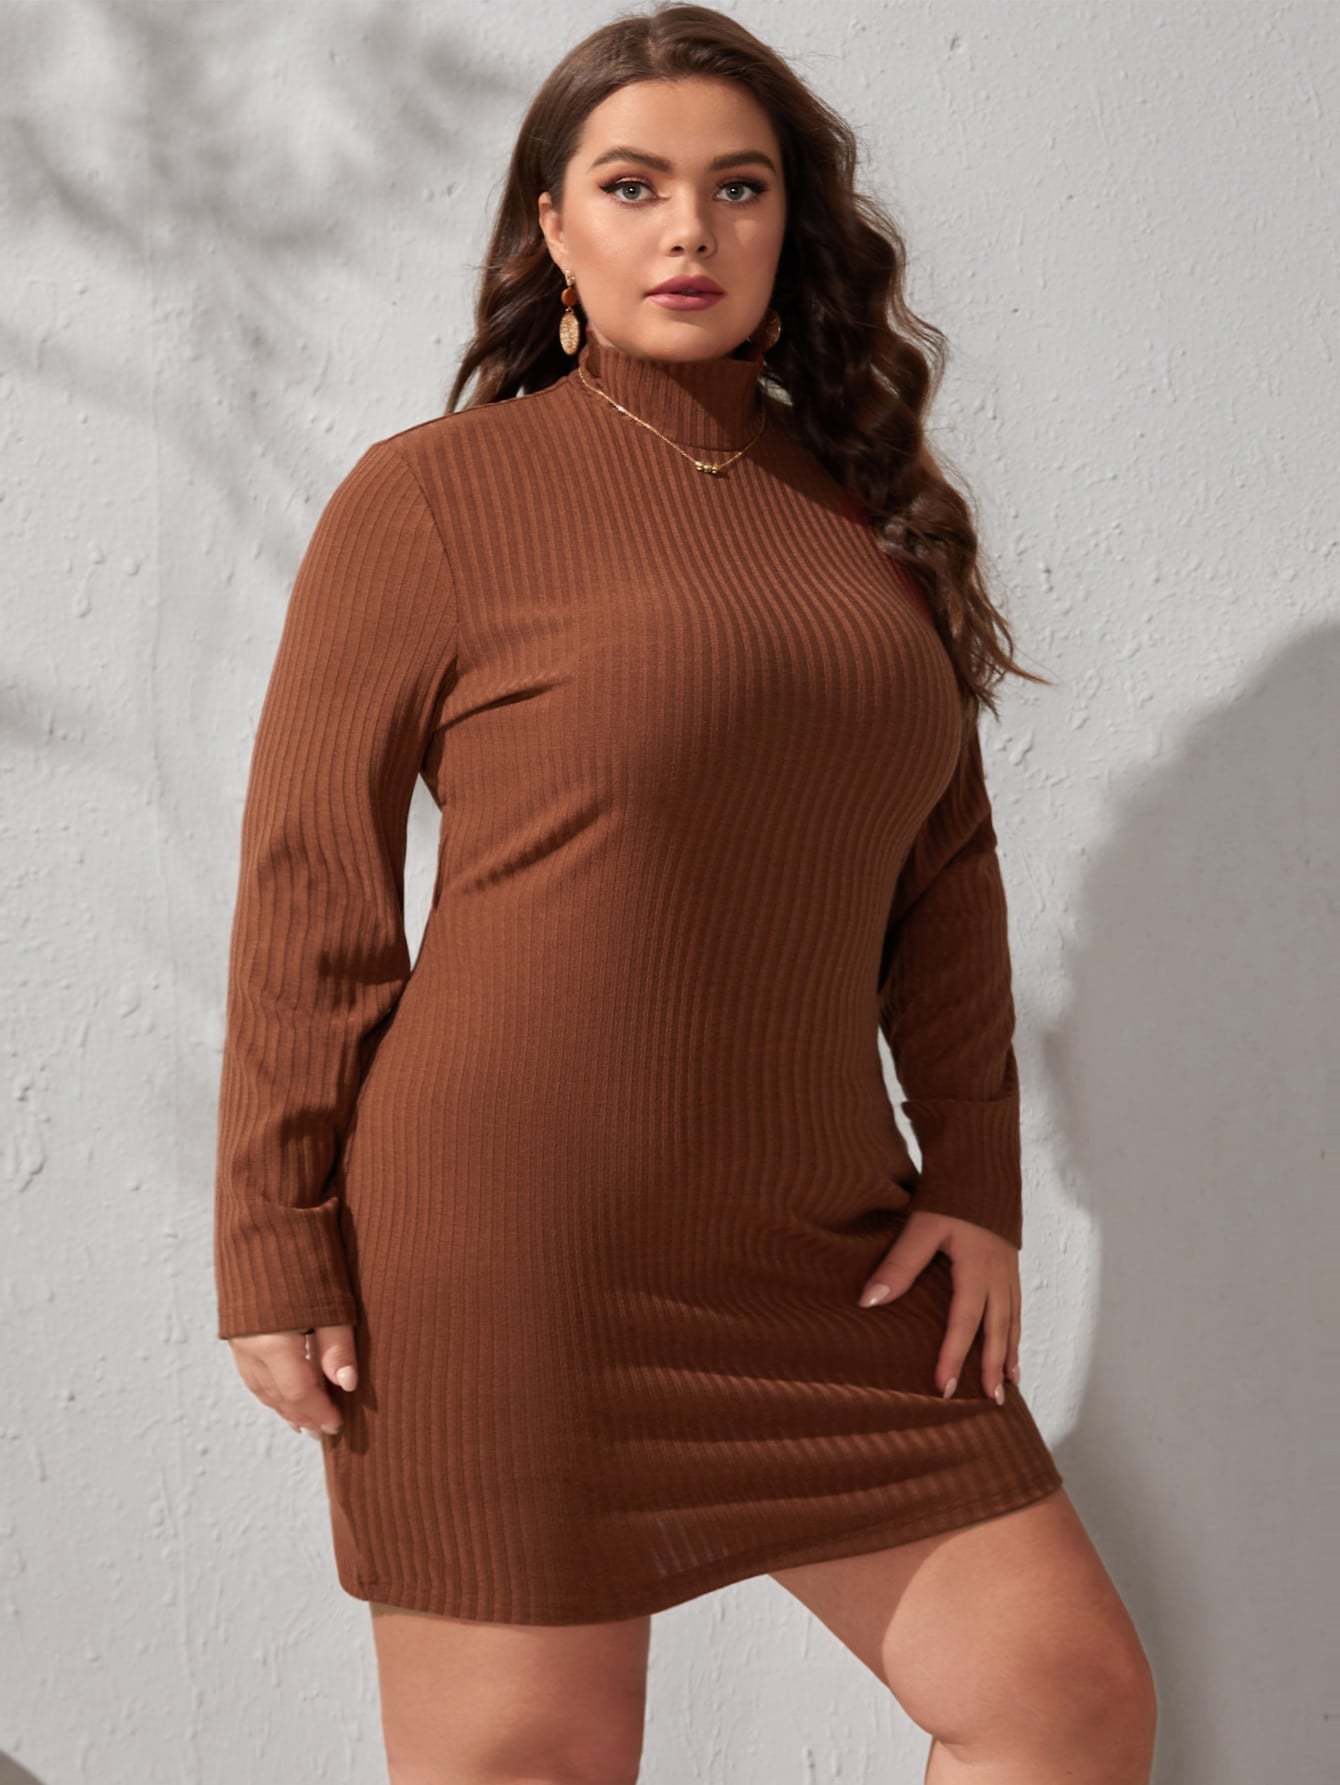 Plus Size Solid Backless Bodycon Dress Sai Feel